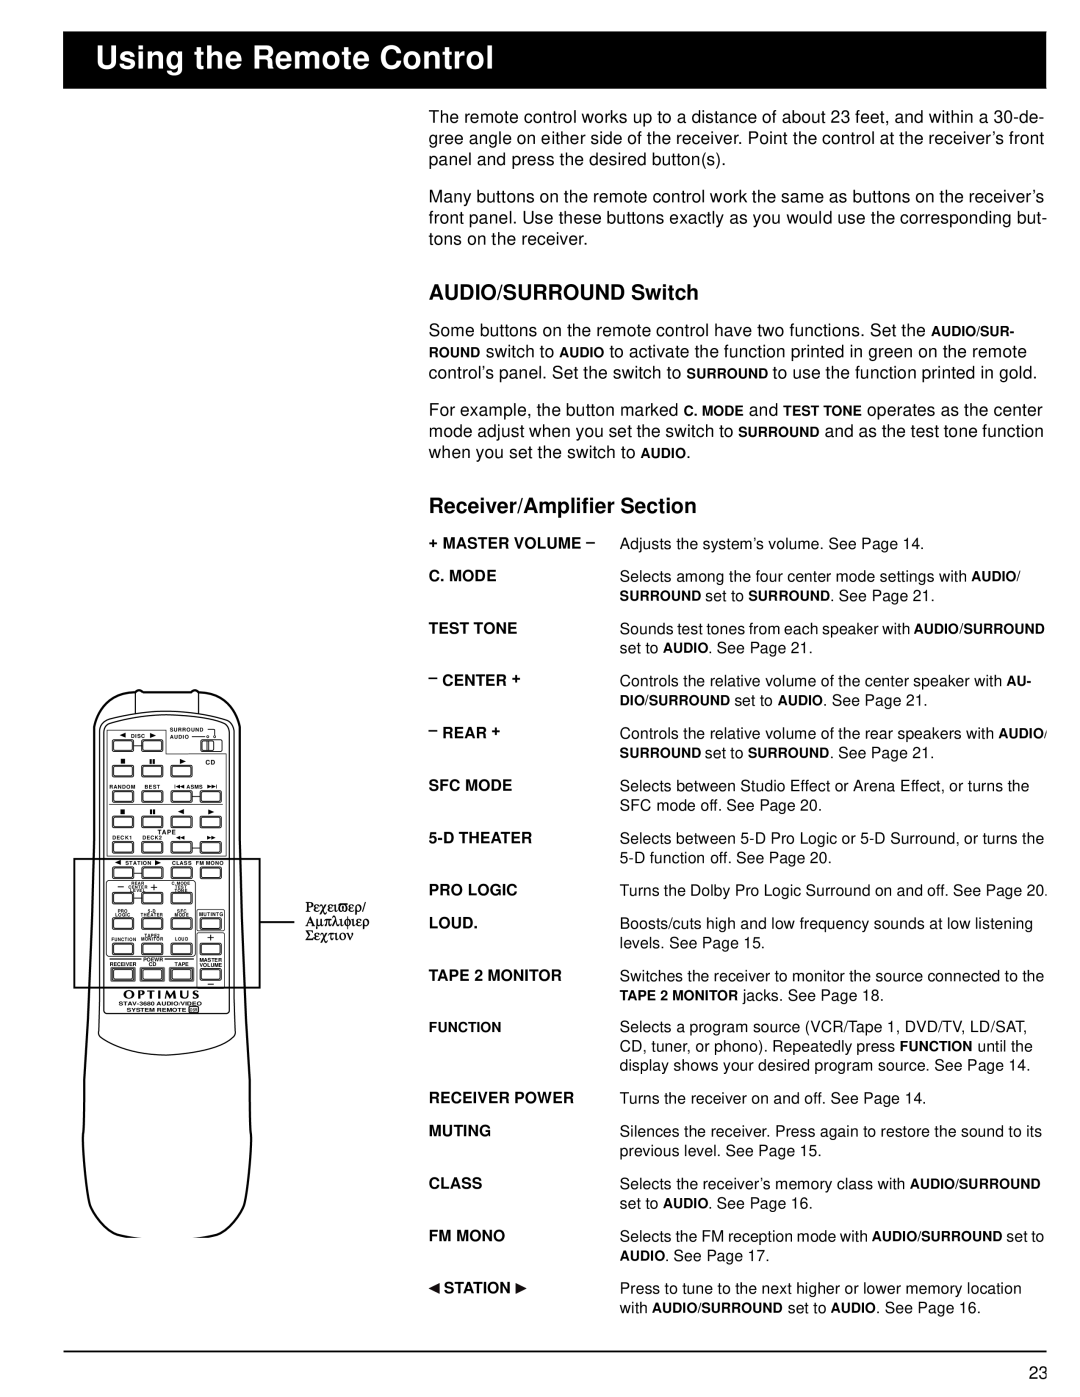 Optimus STAV-3680 owner manual Using the Remote Control, AUDIO/SURROUND Switch, Receiver/Amplifier Section 